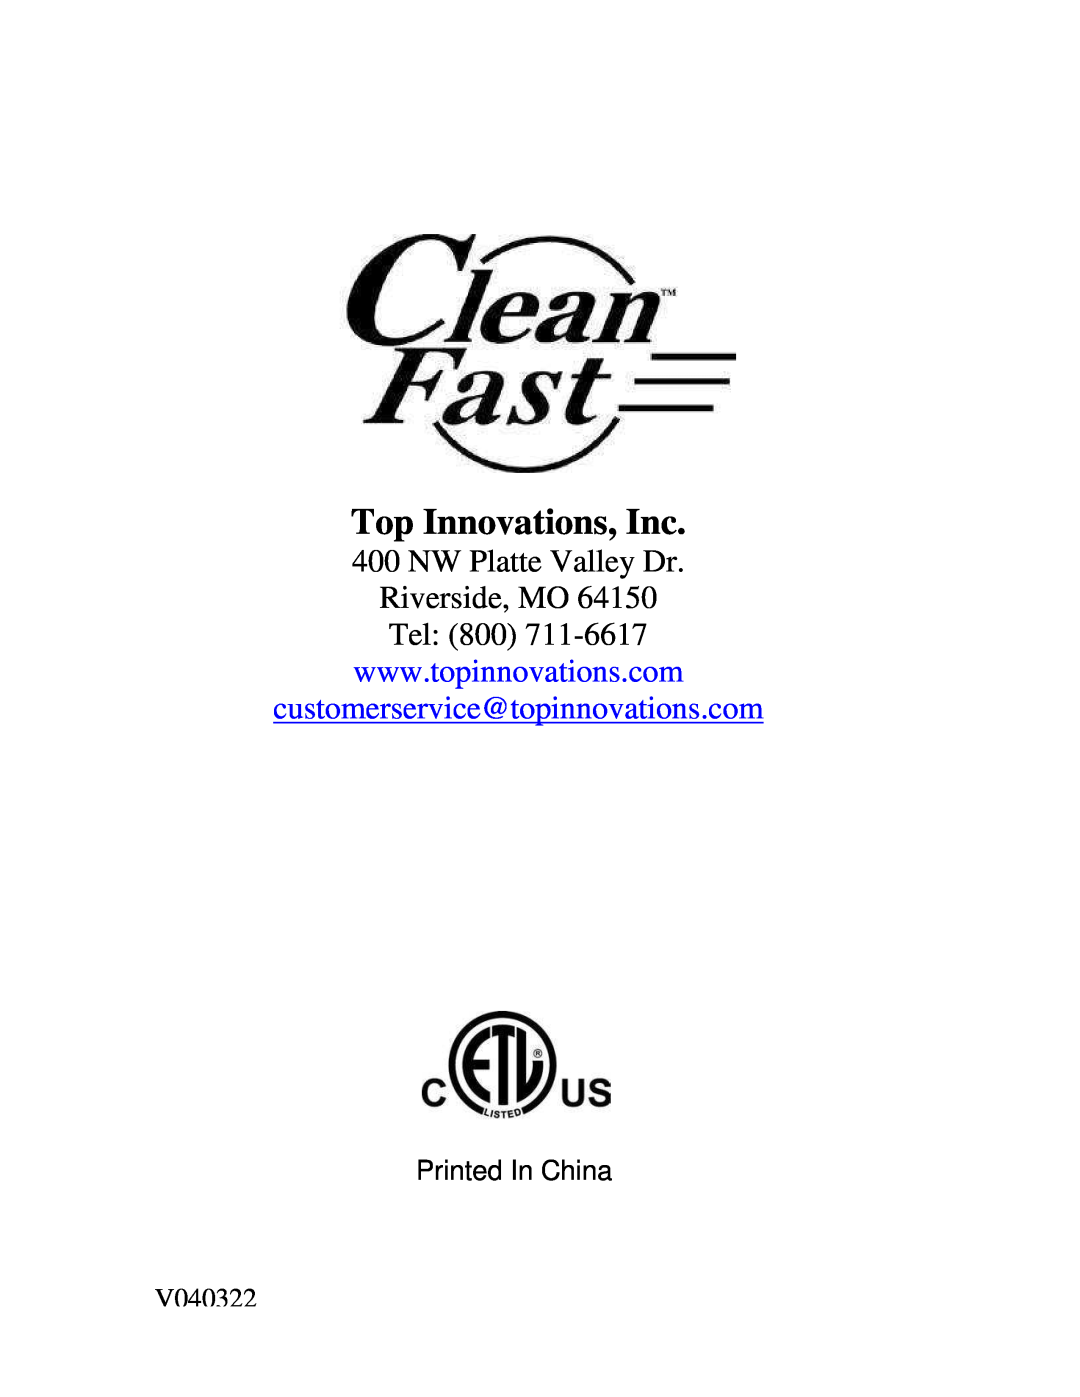 Top Innovations CF-952 warranty Top Innovations, Inc, NW Platte Valley Dr 